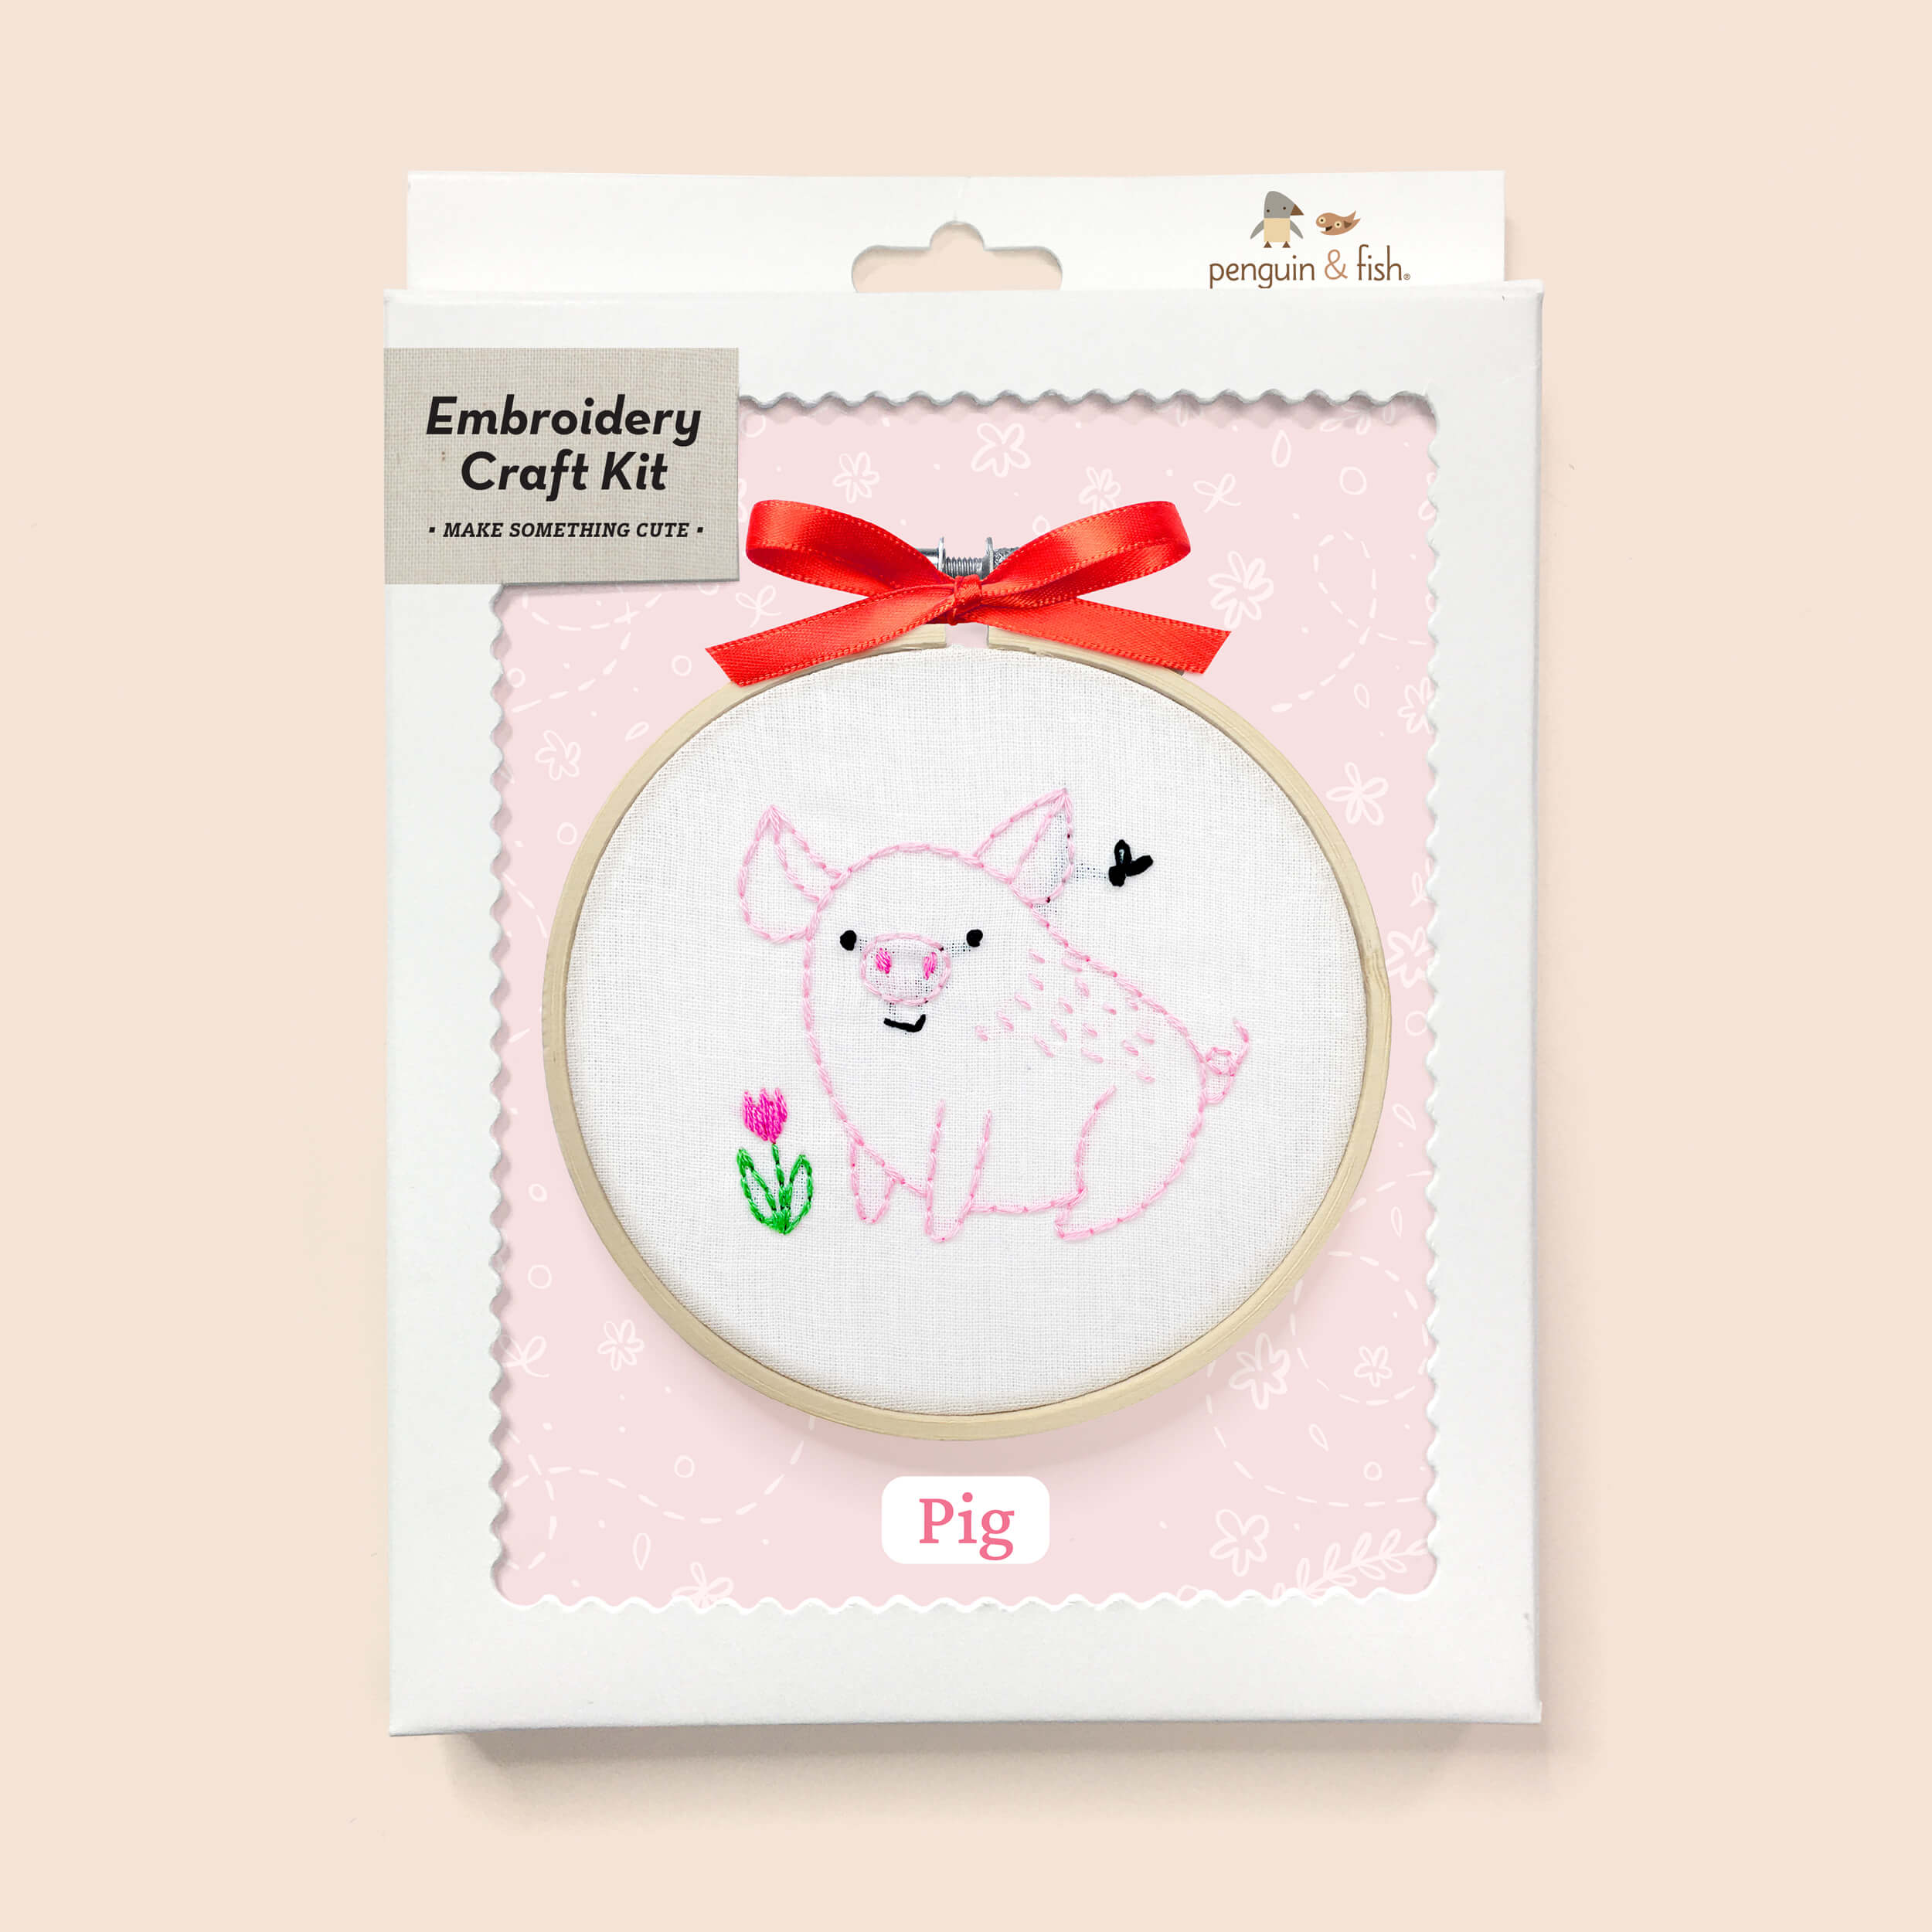 Pig embroidery kit in a box